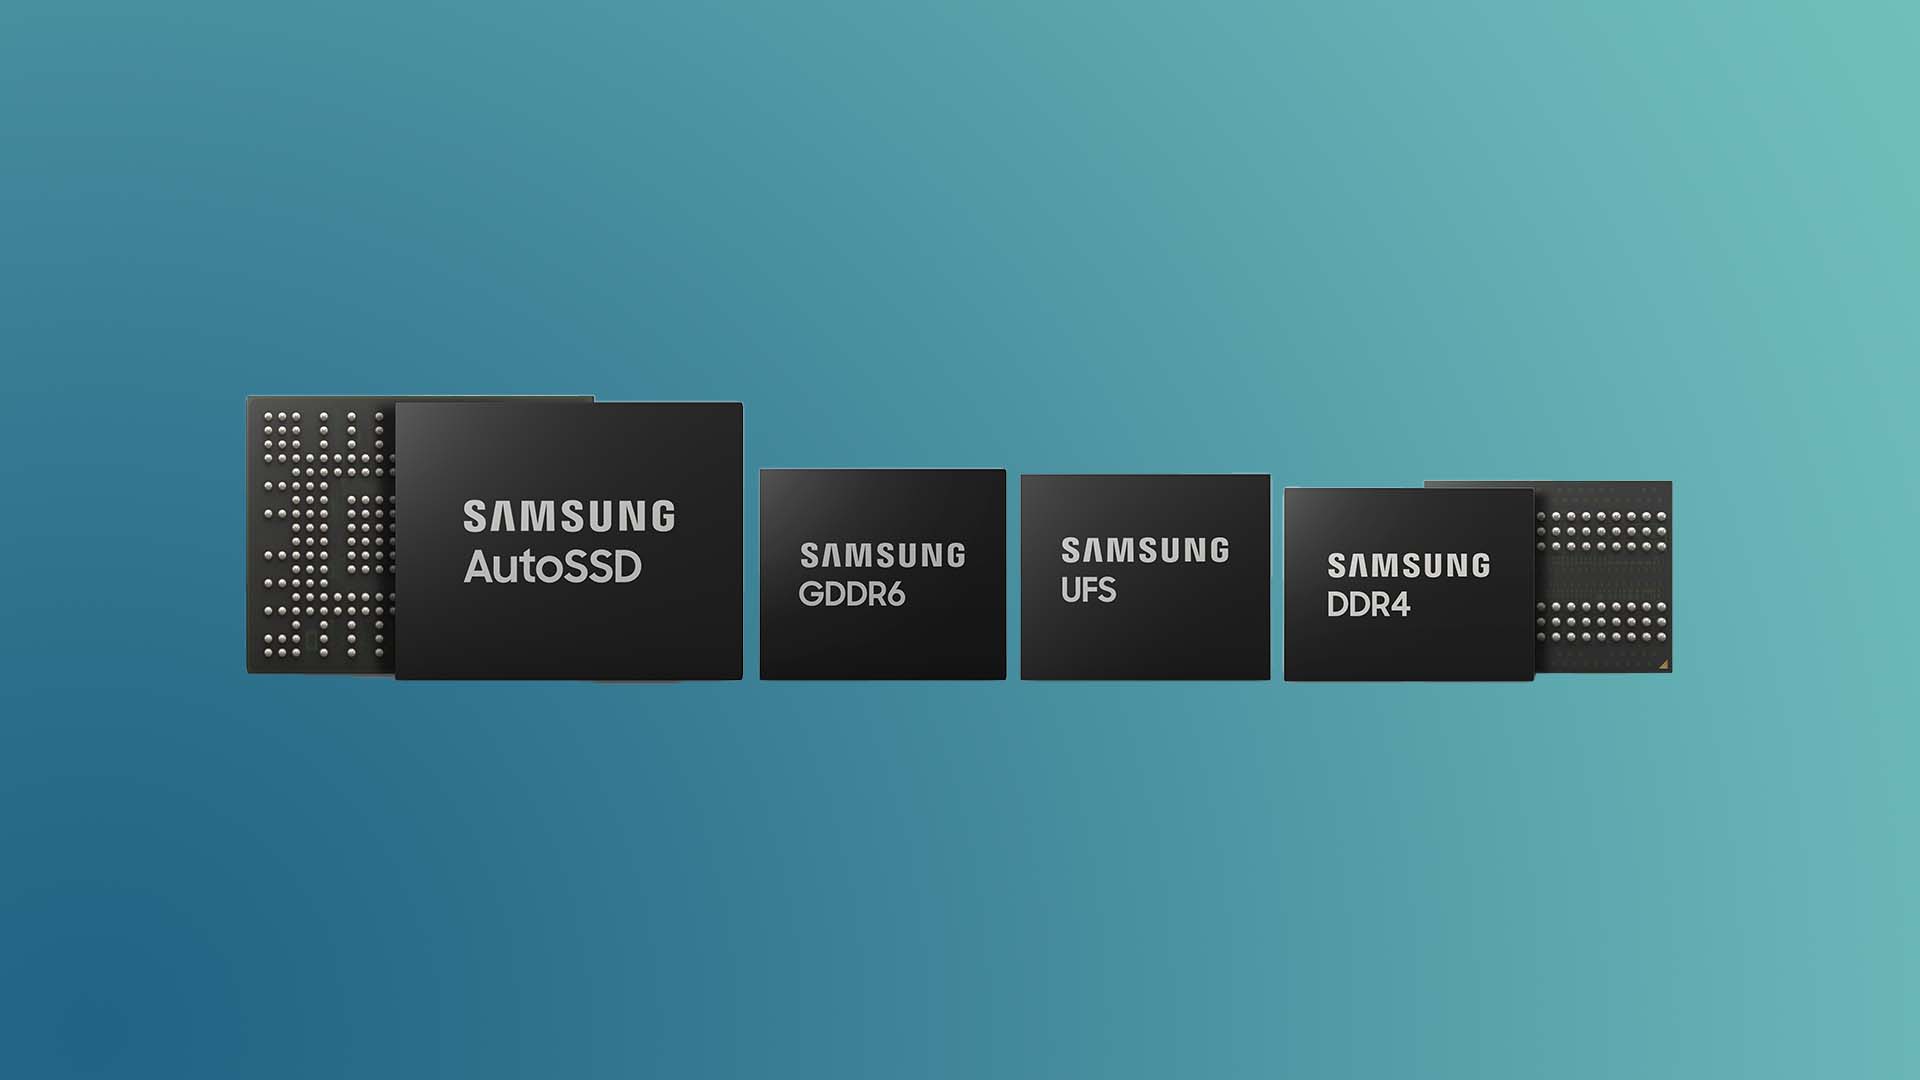 Samsung may start developing chips for home appliances, self-driving cars